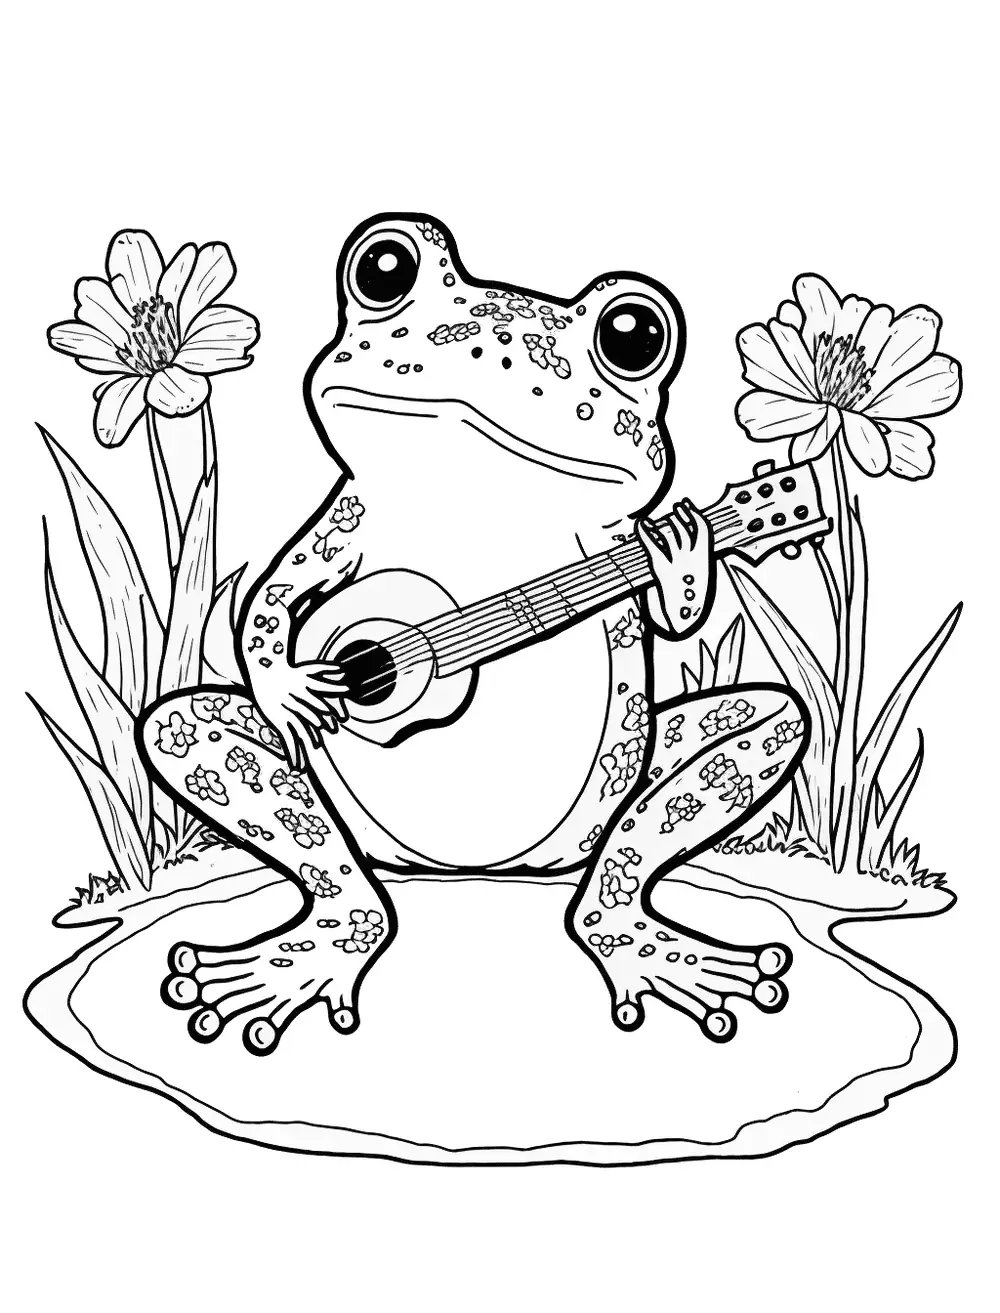 Frog Playing an Instrument Coloring Page - A frog playing a musical instrument, like a guitar or trumpet.